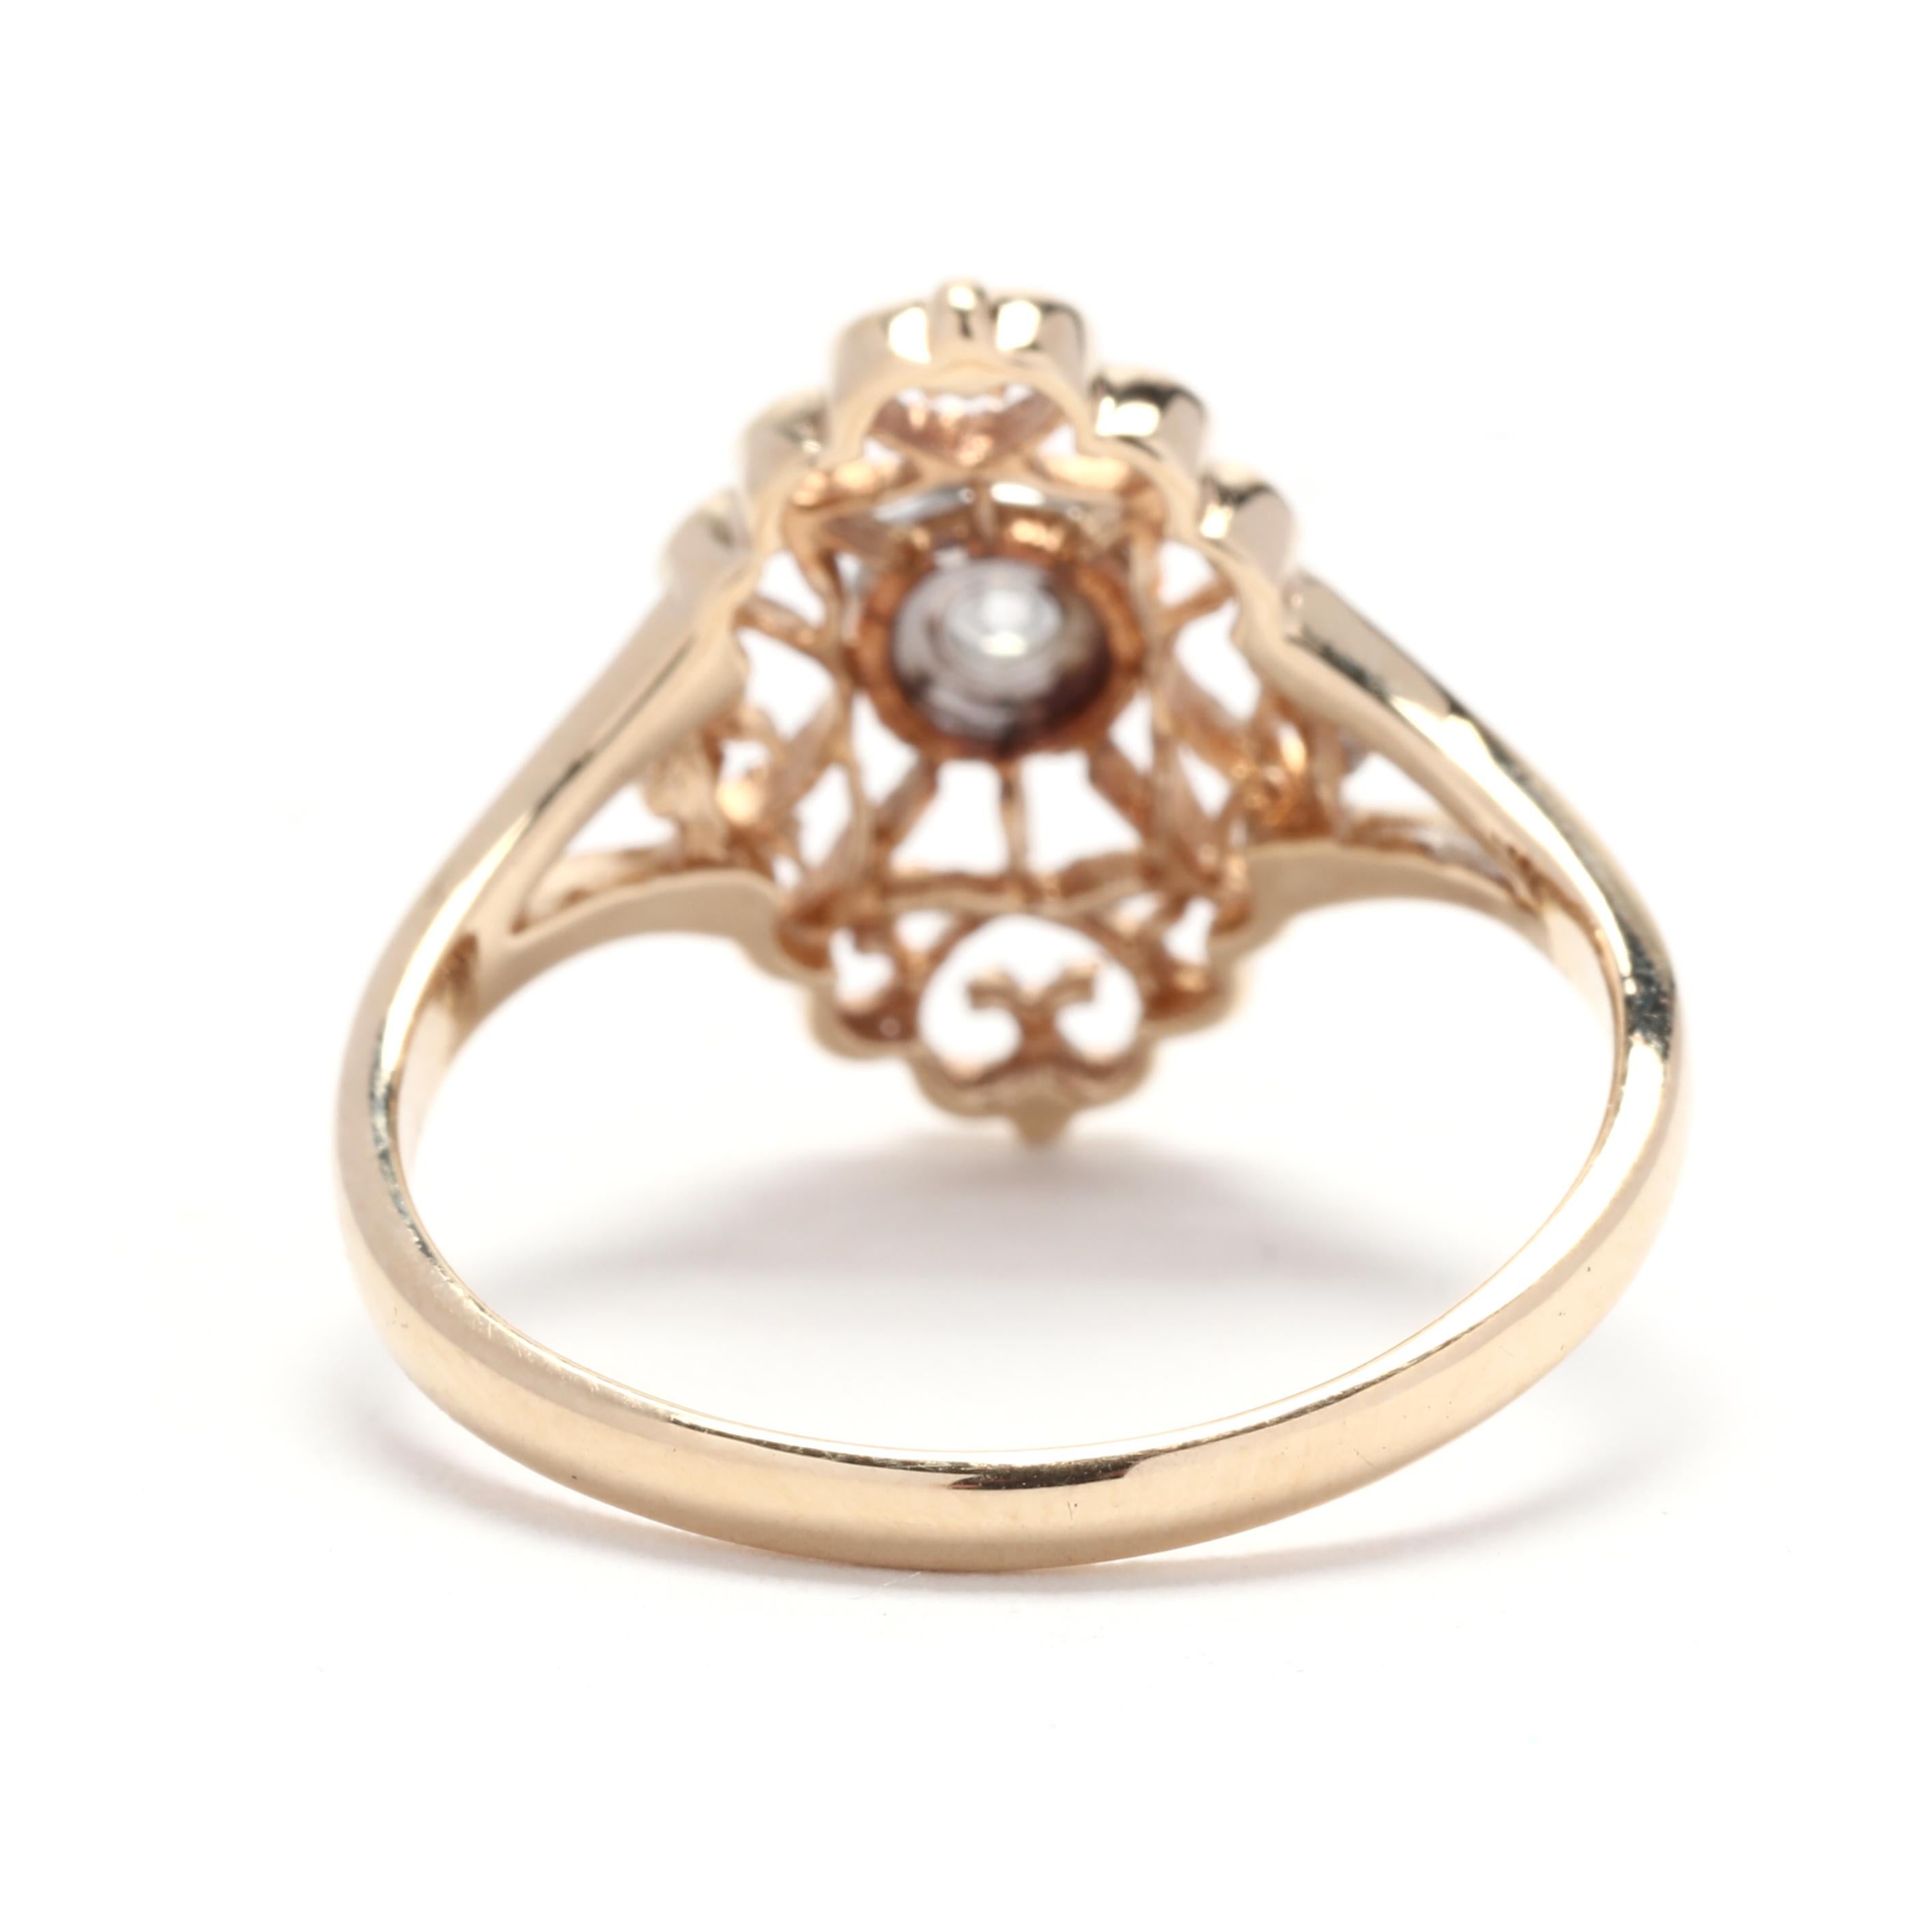 Brilliant Cut Vintage Diamond Filigree Ring, 10K Yellow Gold, Ring Size 6, Navette Ring For Sale